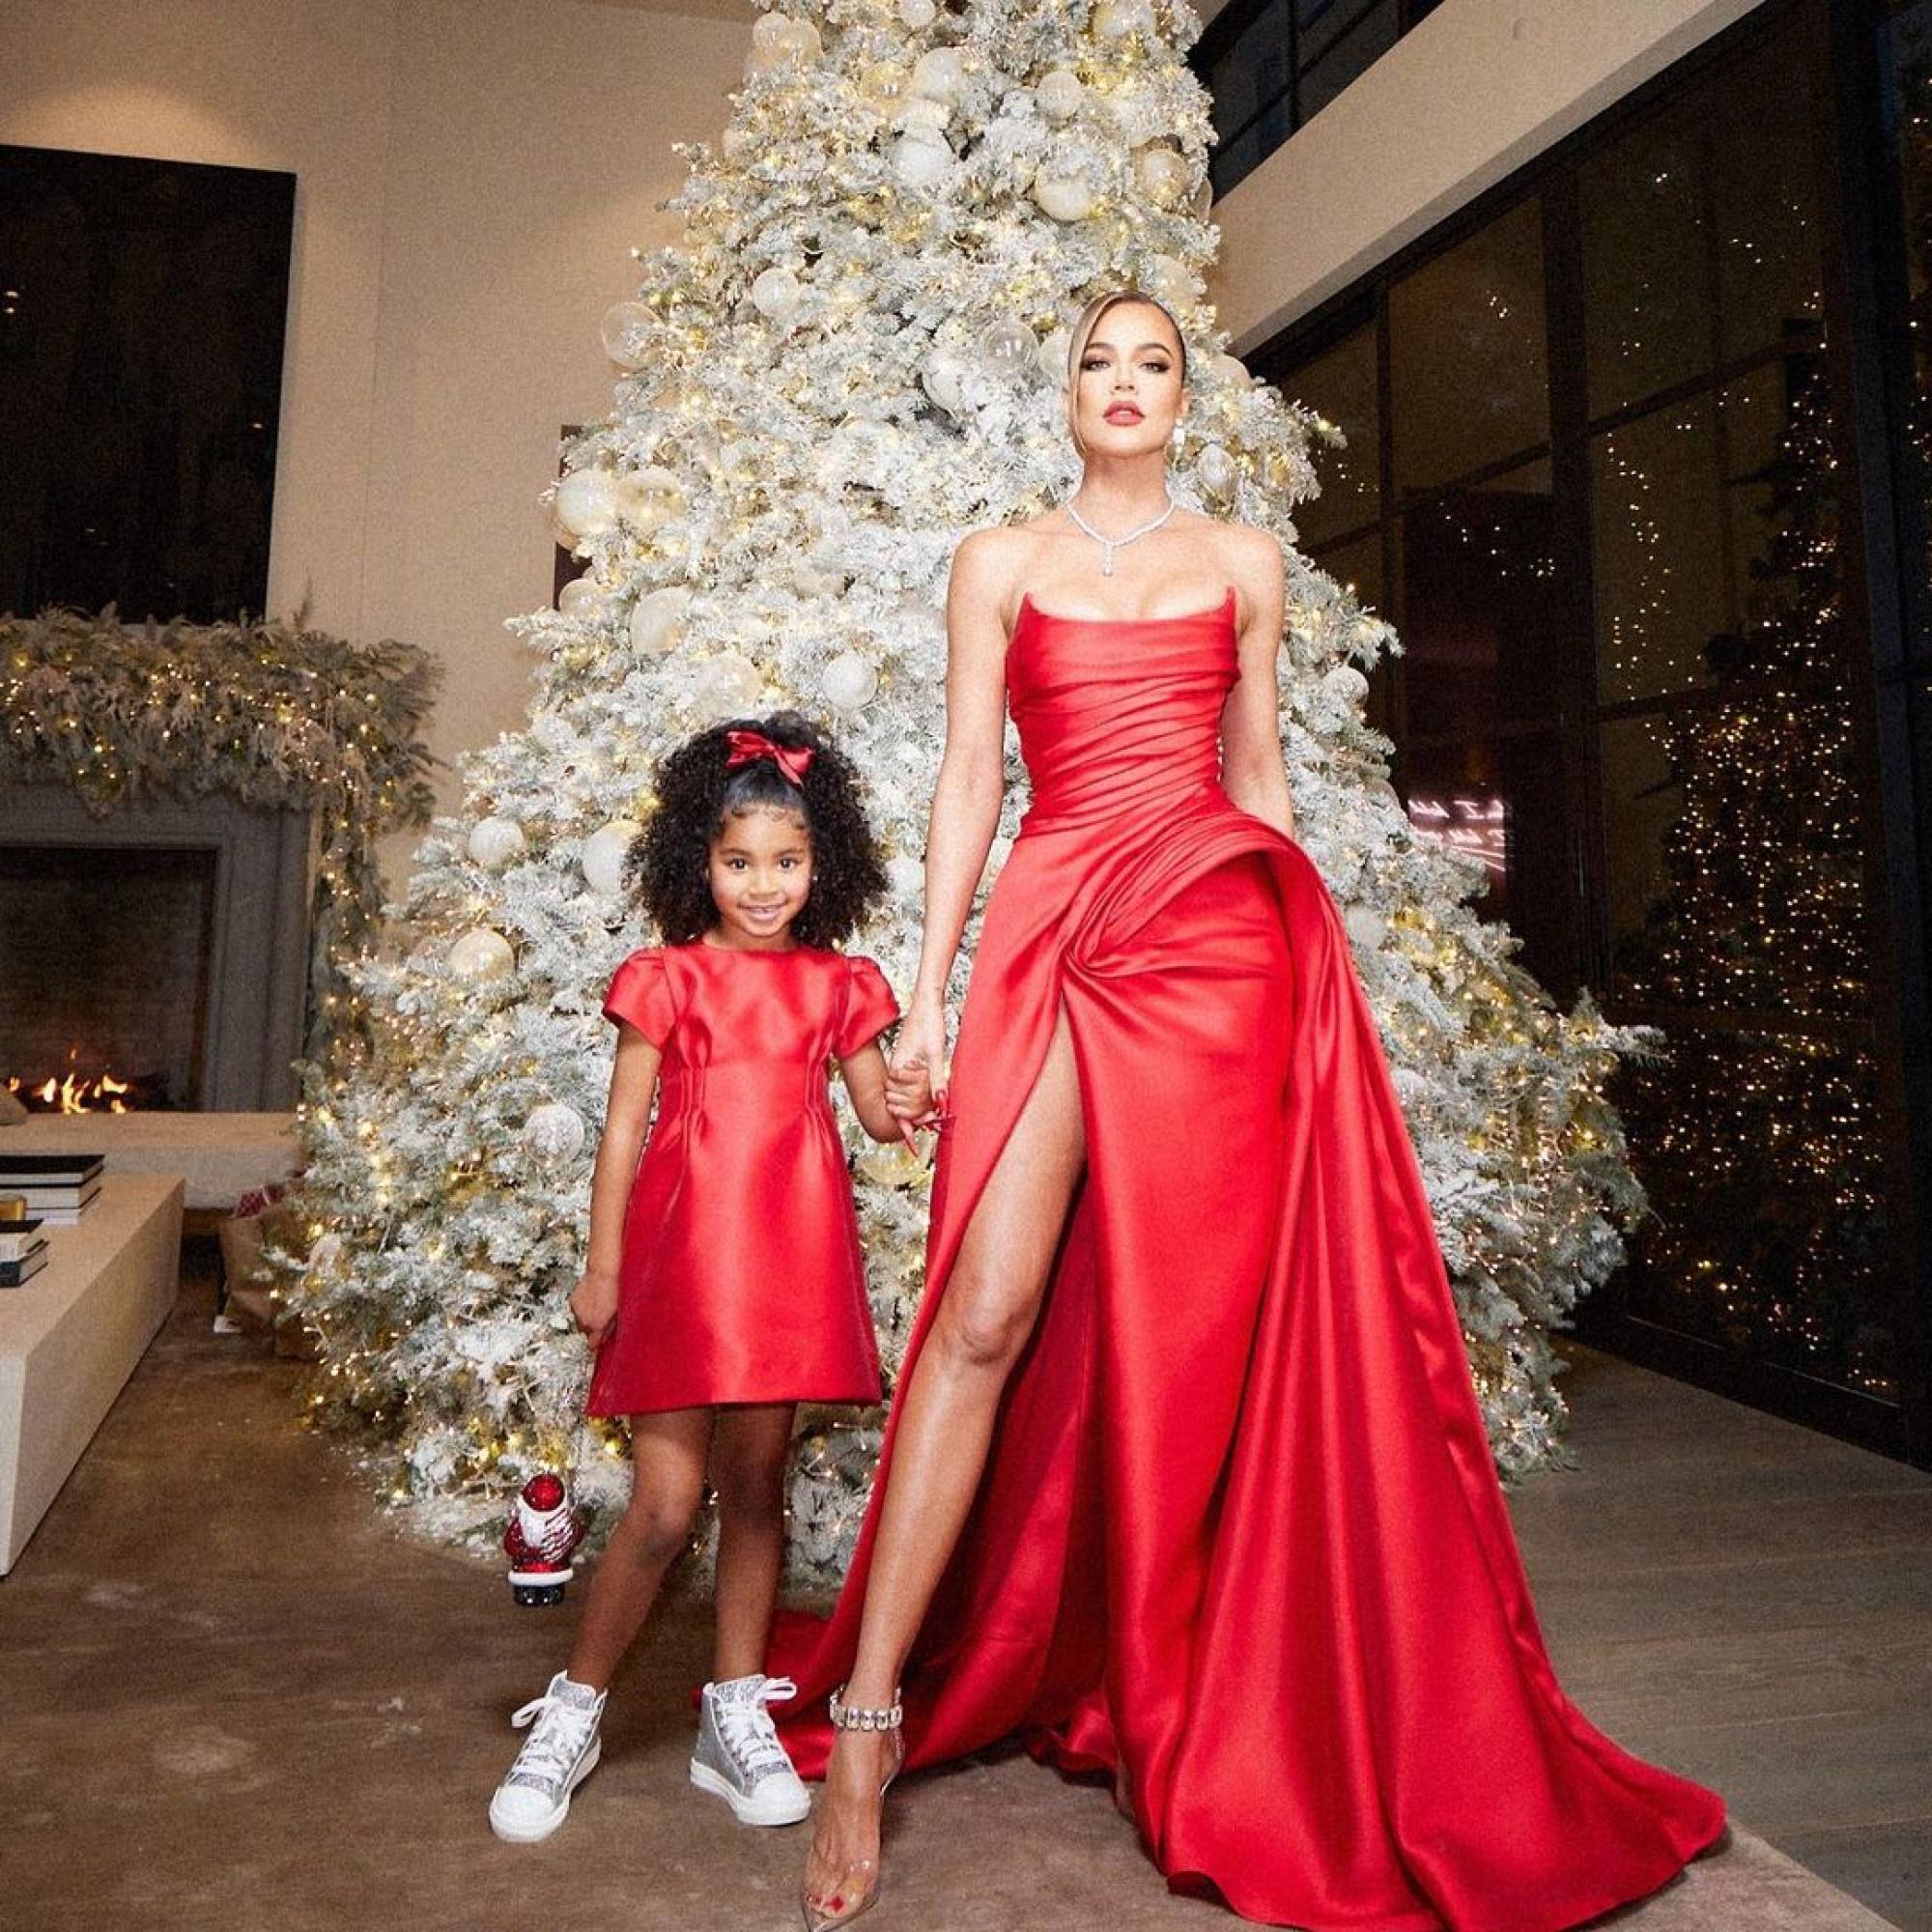 8 of Khloé Kardashian and True Thompson's best twinning looks: the adorable  mother-daughter duo matched in Dior, Dolce & Gabbana, Burberry, Kim  Kardashian's Skims and even Disney Halloween costumes